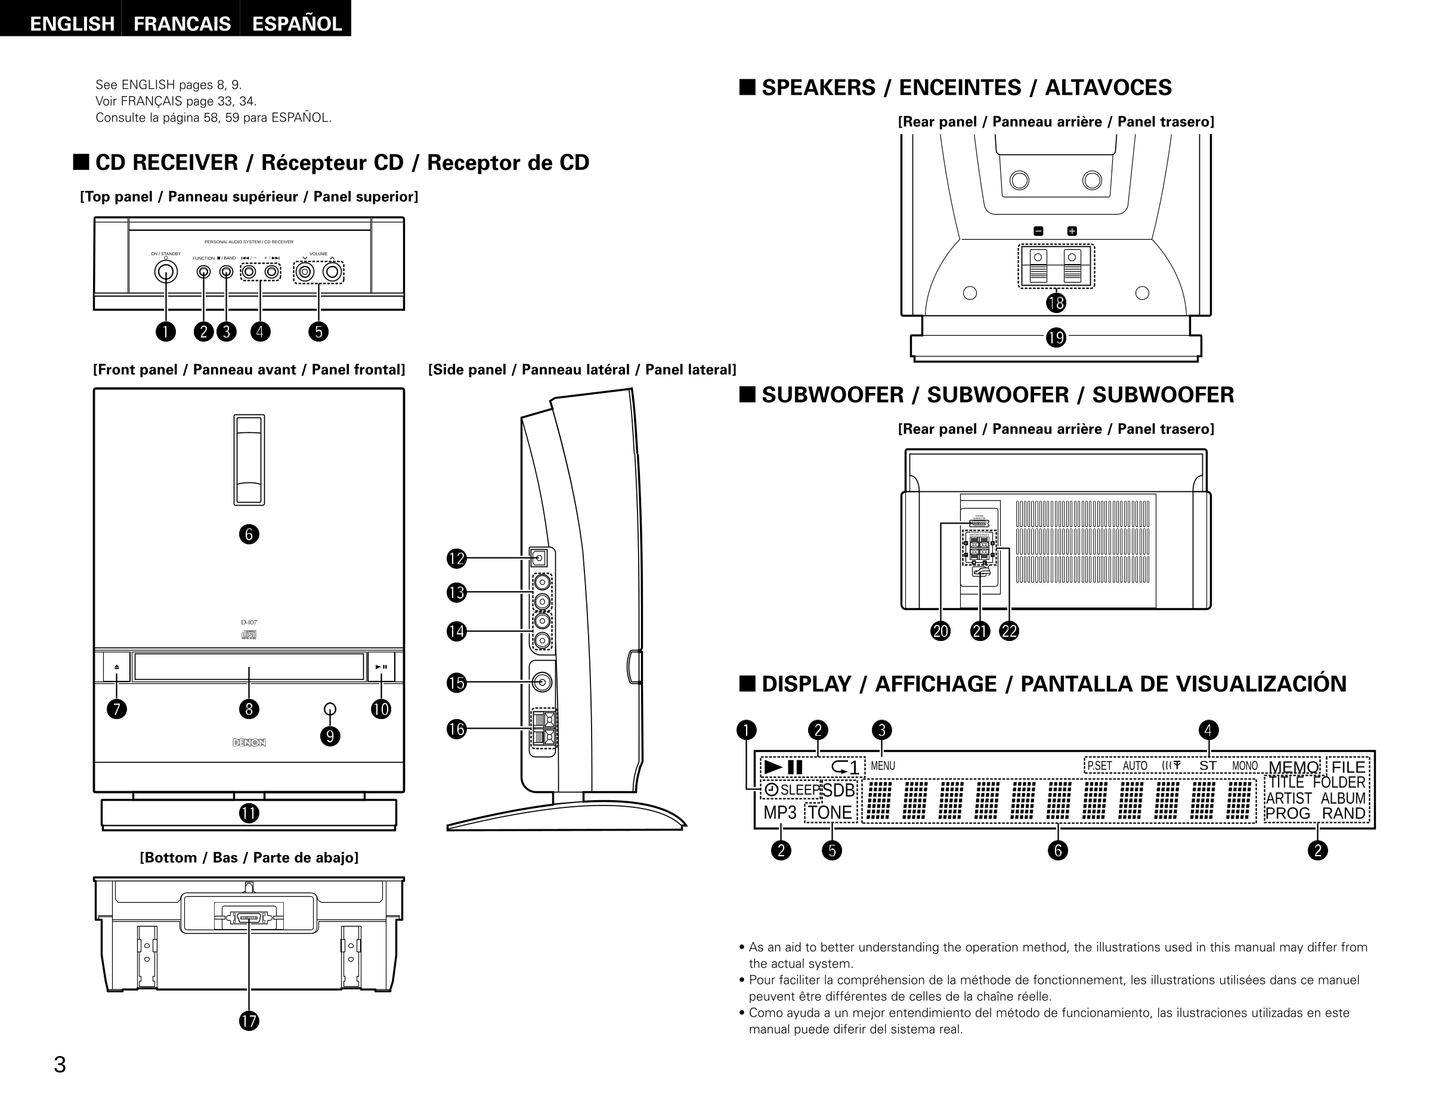 Denon D-107 Audio System Owner/ User Manual (Pages: 80)